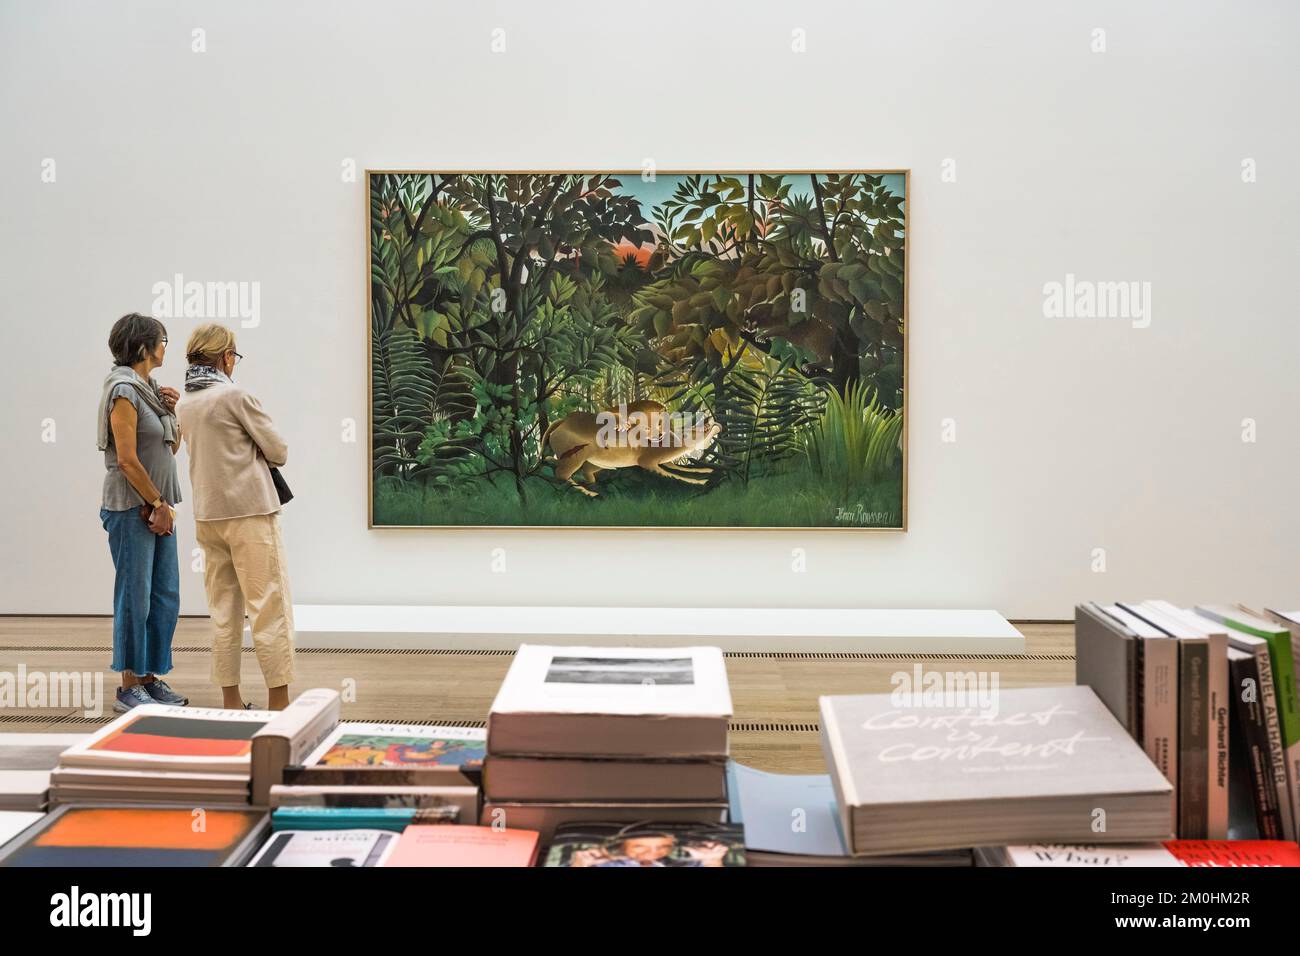 Switzerland, Basel, Riehen, Beyeler Foundation, The hungry lion throws itself on the antelope of the painter Henri Rousseau Stock Photo